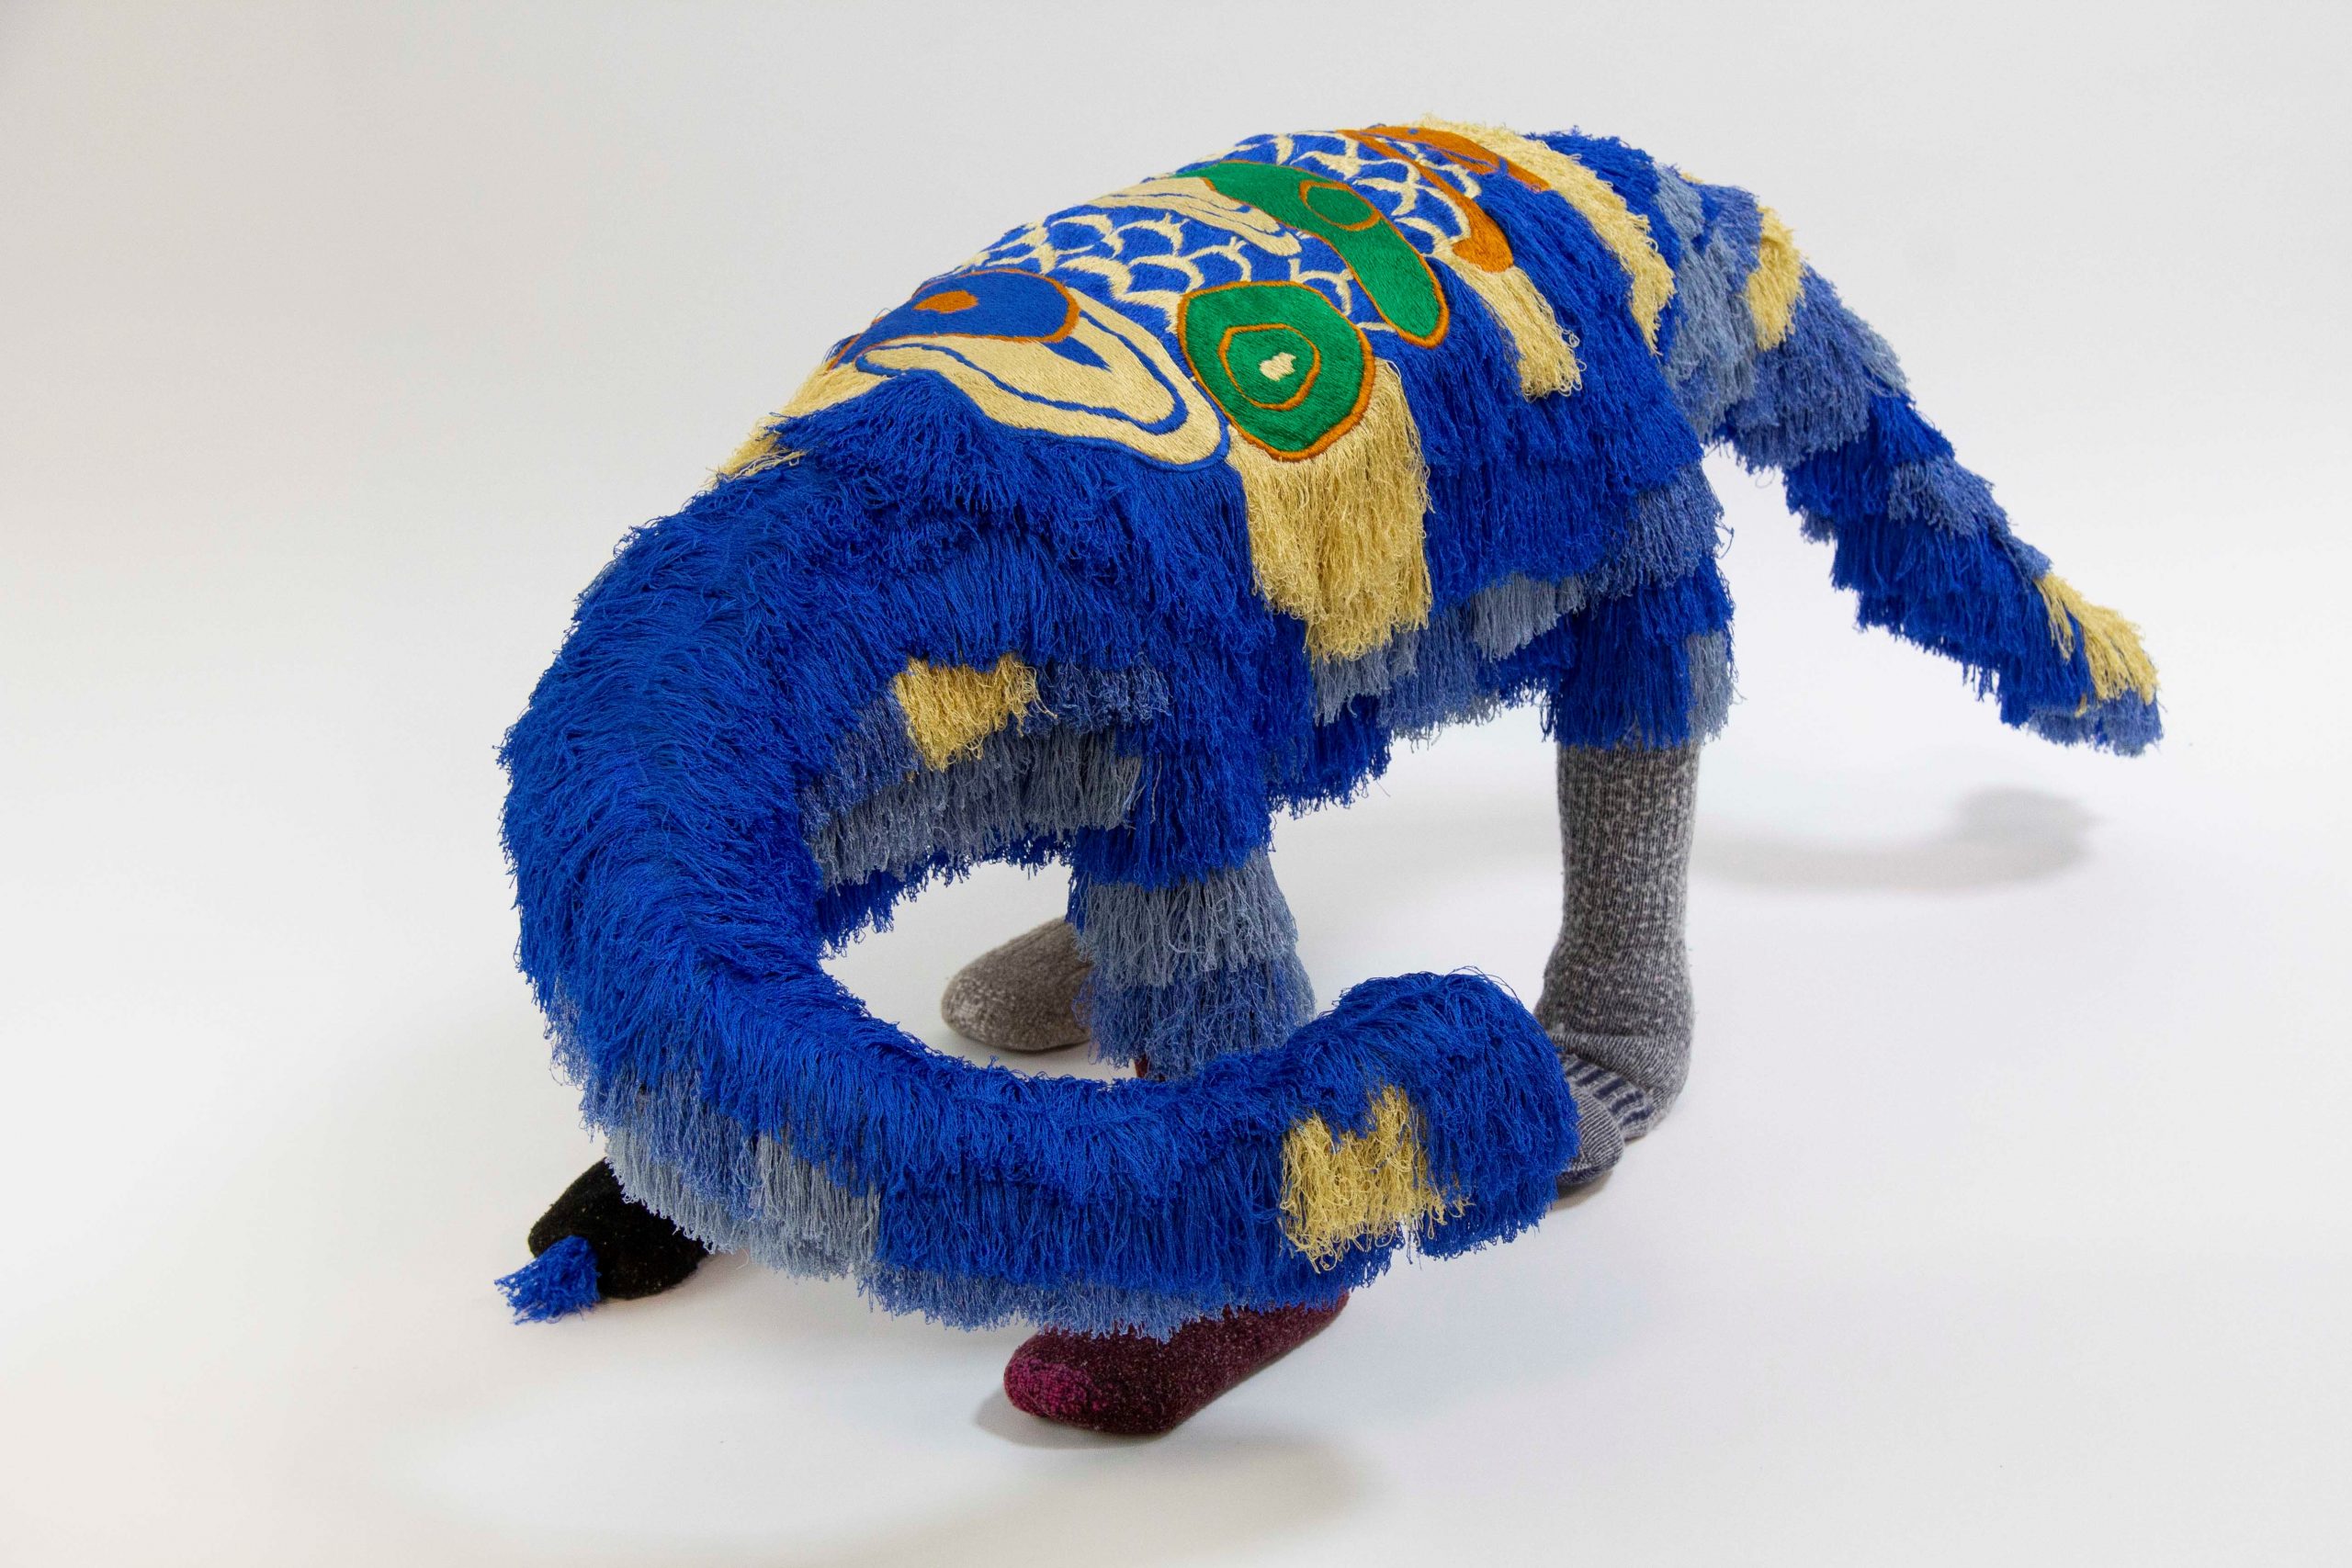 A strange dragonlike creature made from recycled textiles.